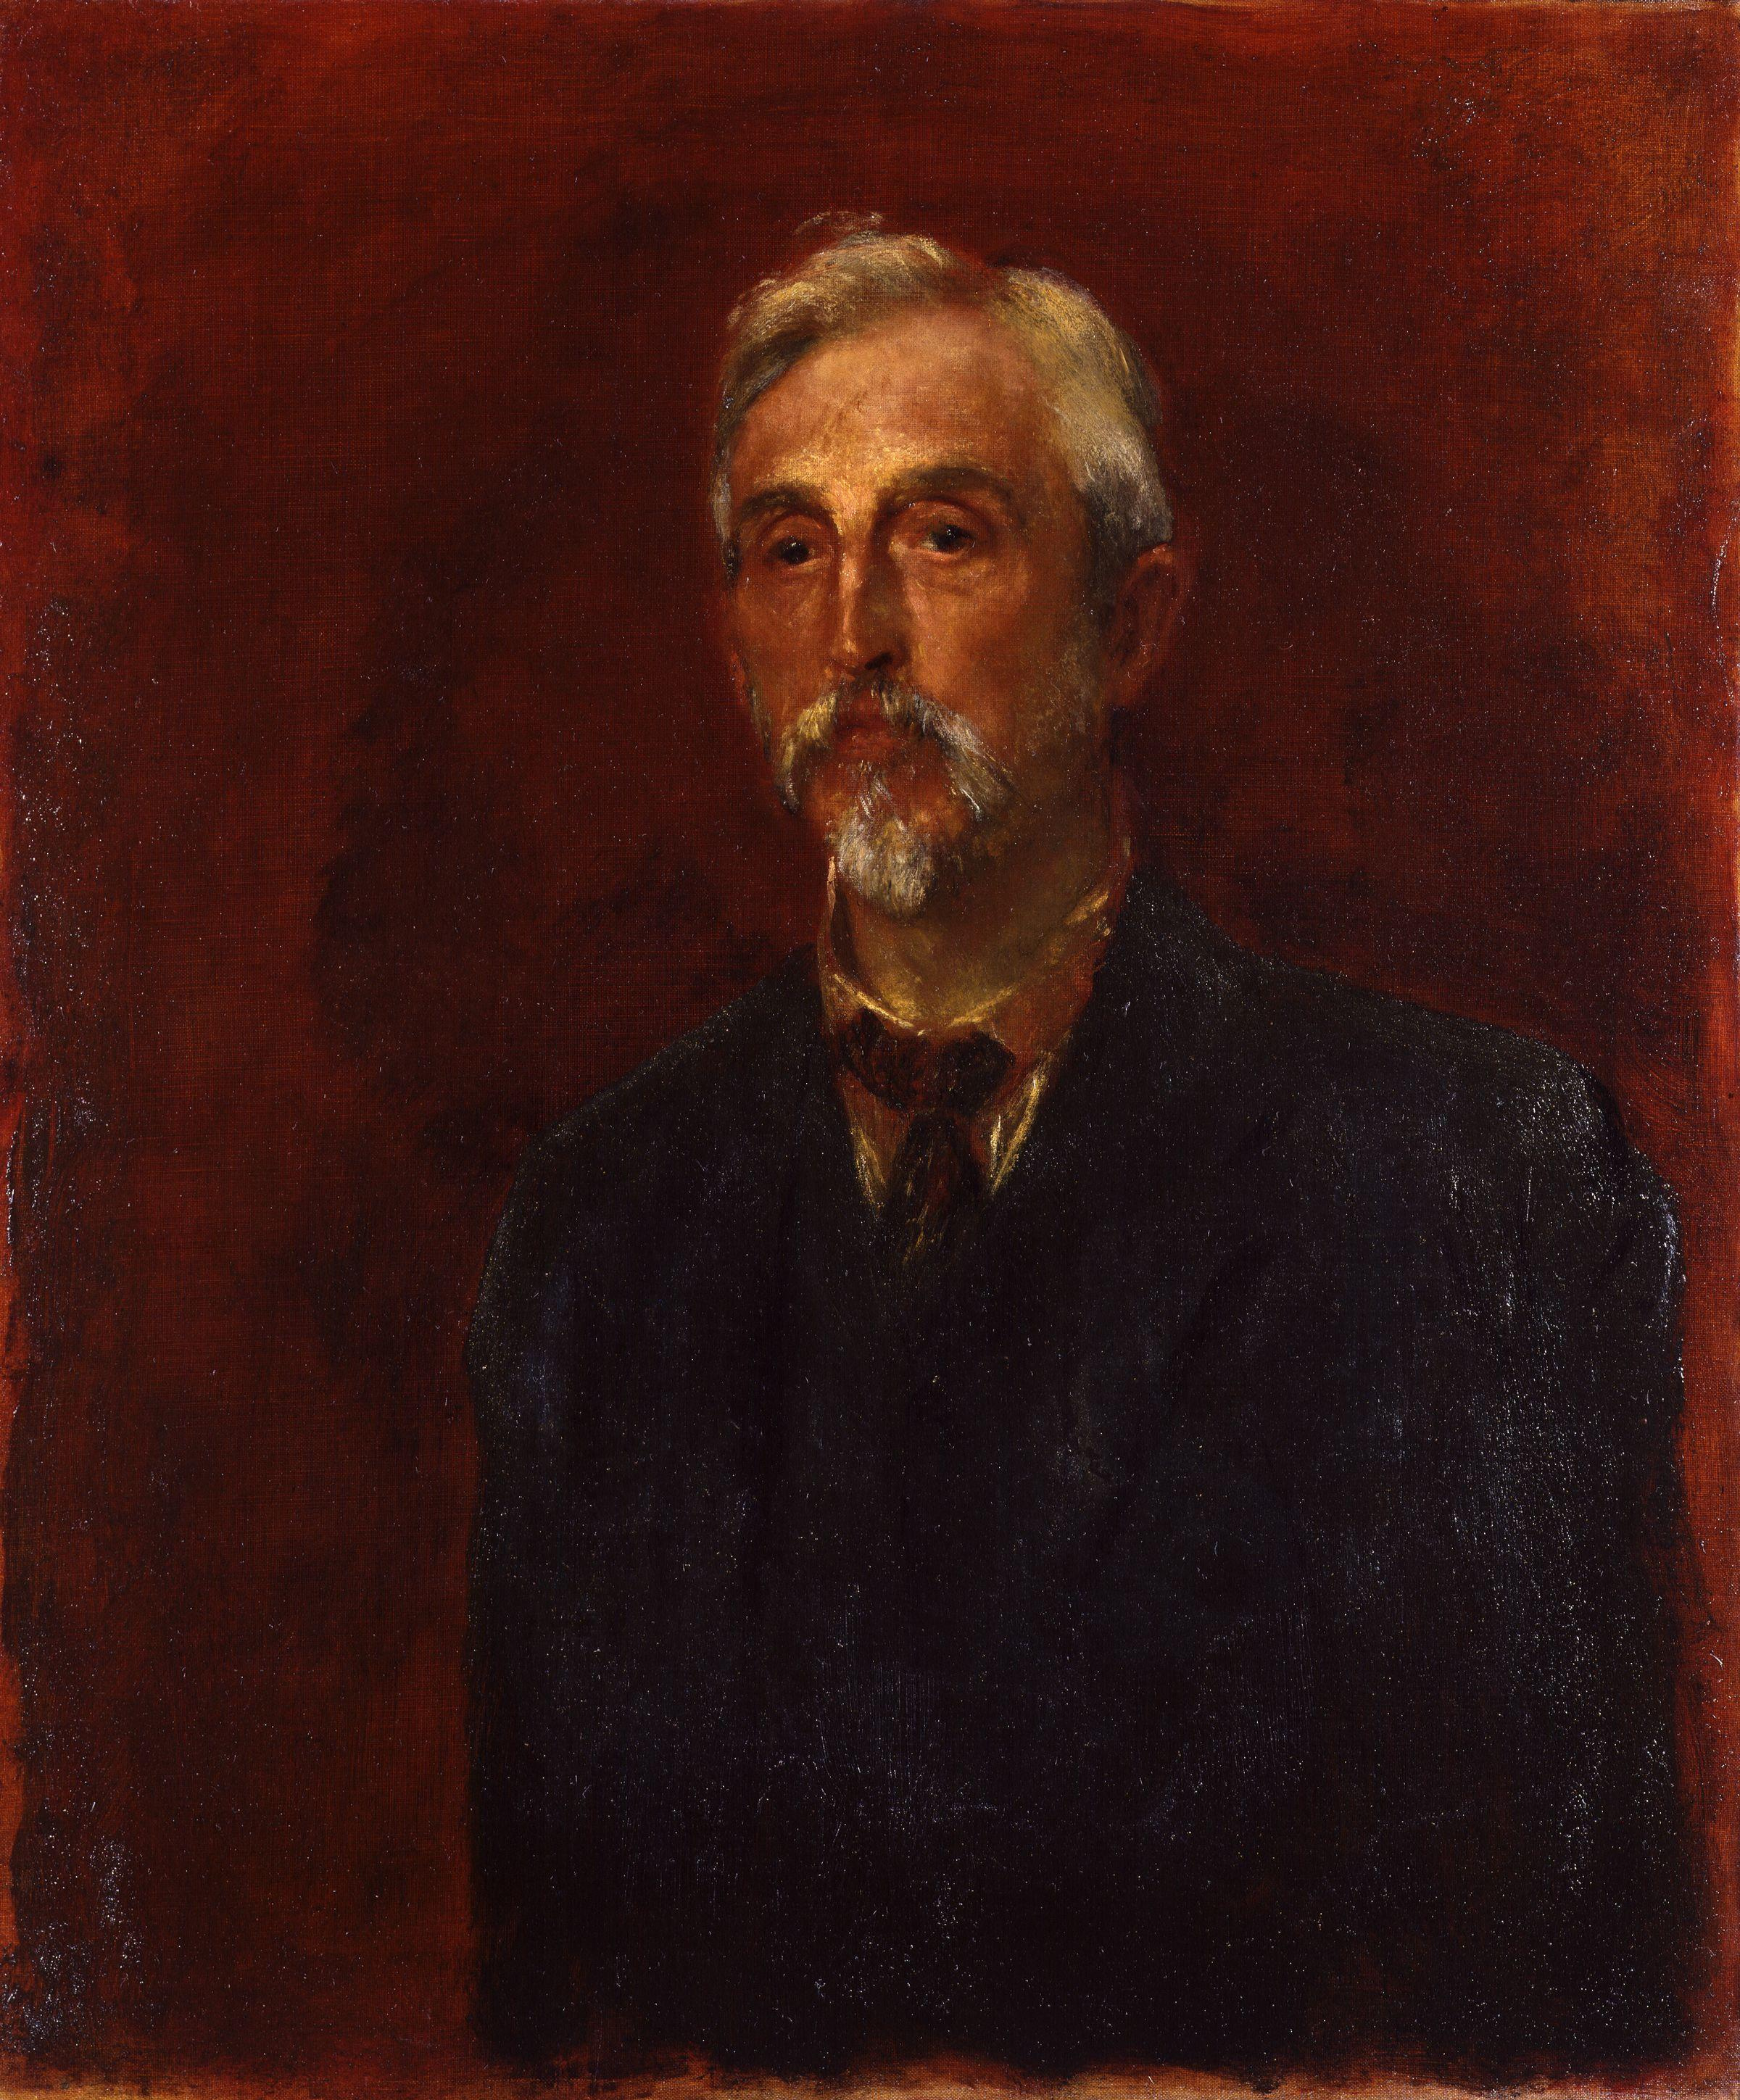 Charles Booth by George Frederic Watts